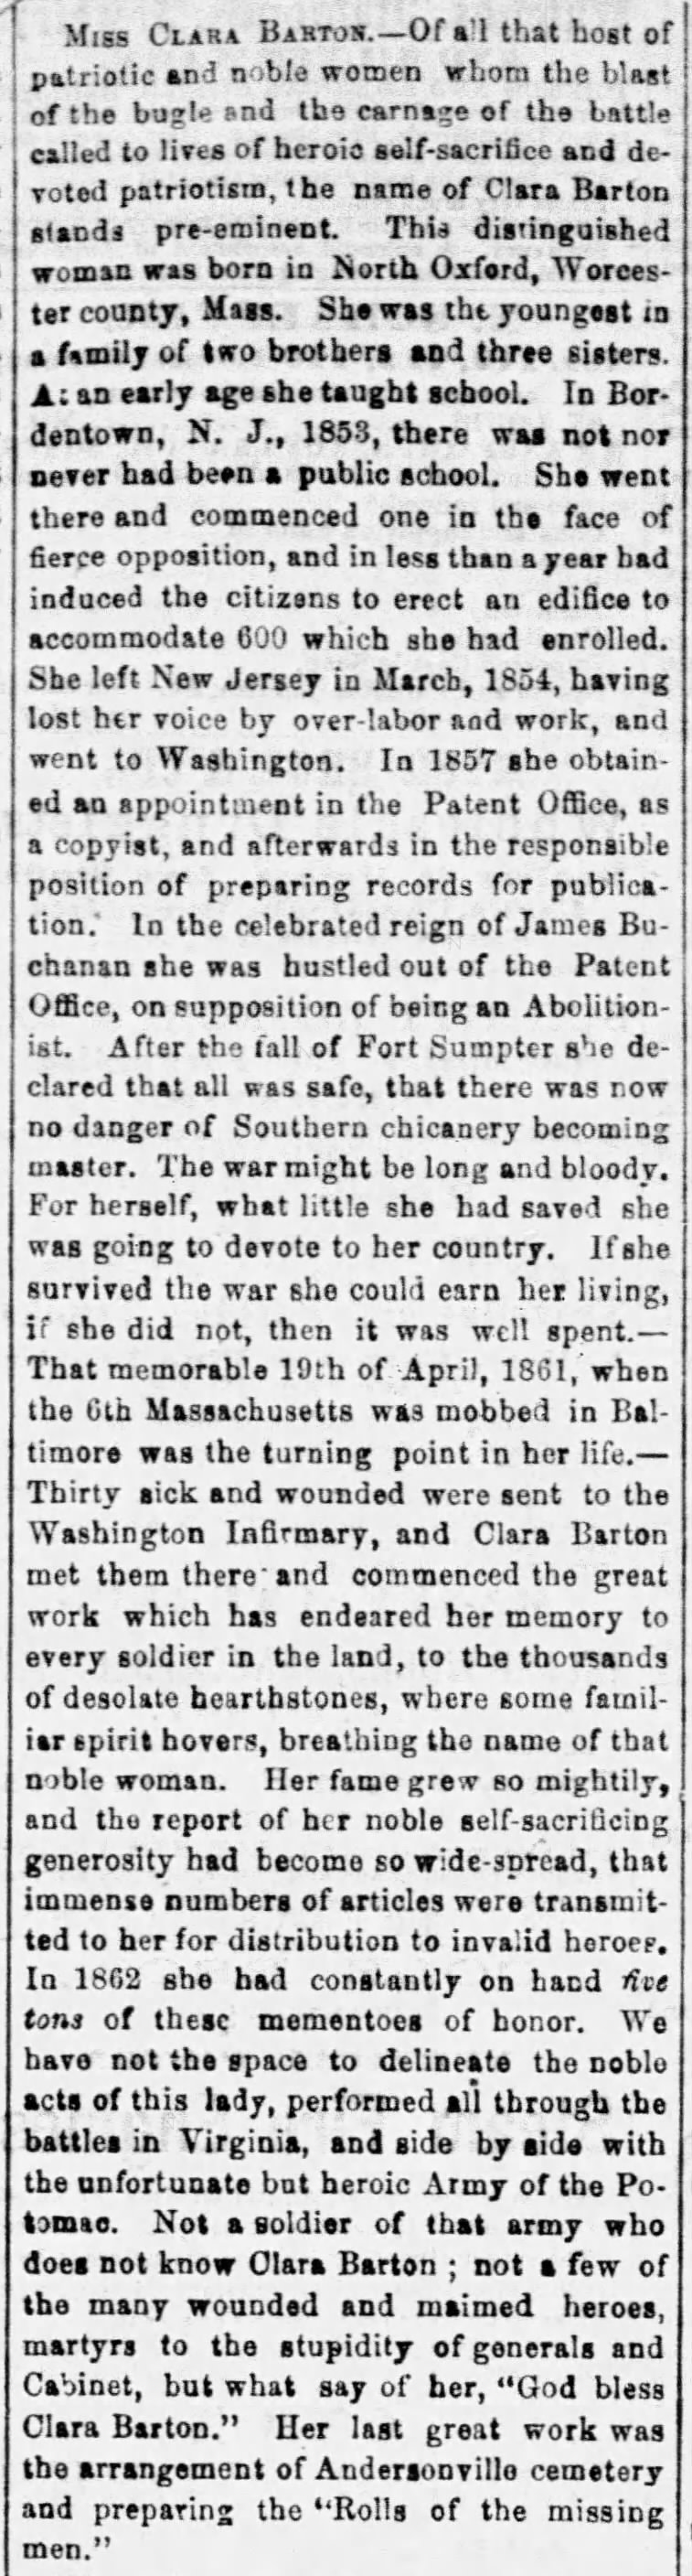 Editorial summary of the life and work of "Miss Clara Barton" as shared in 1867